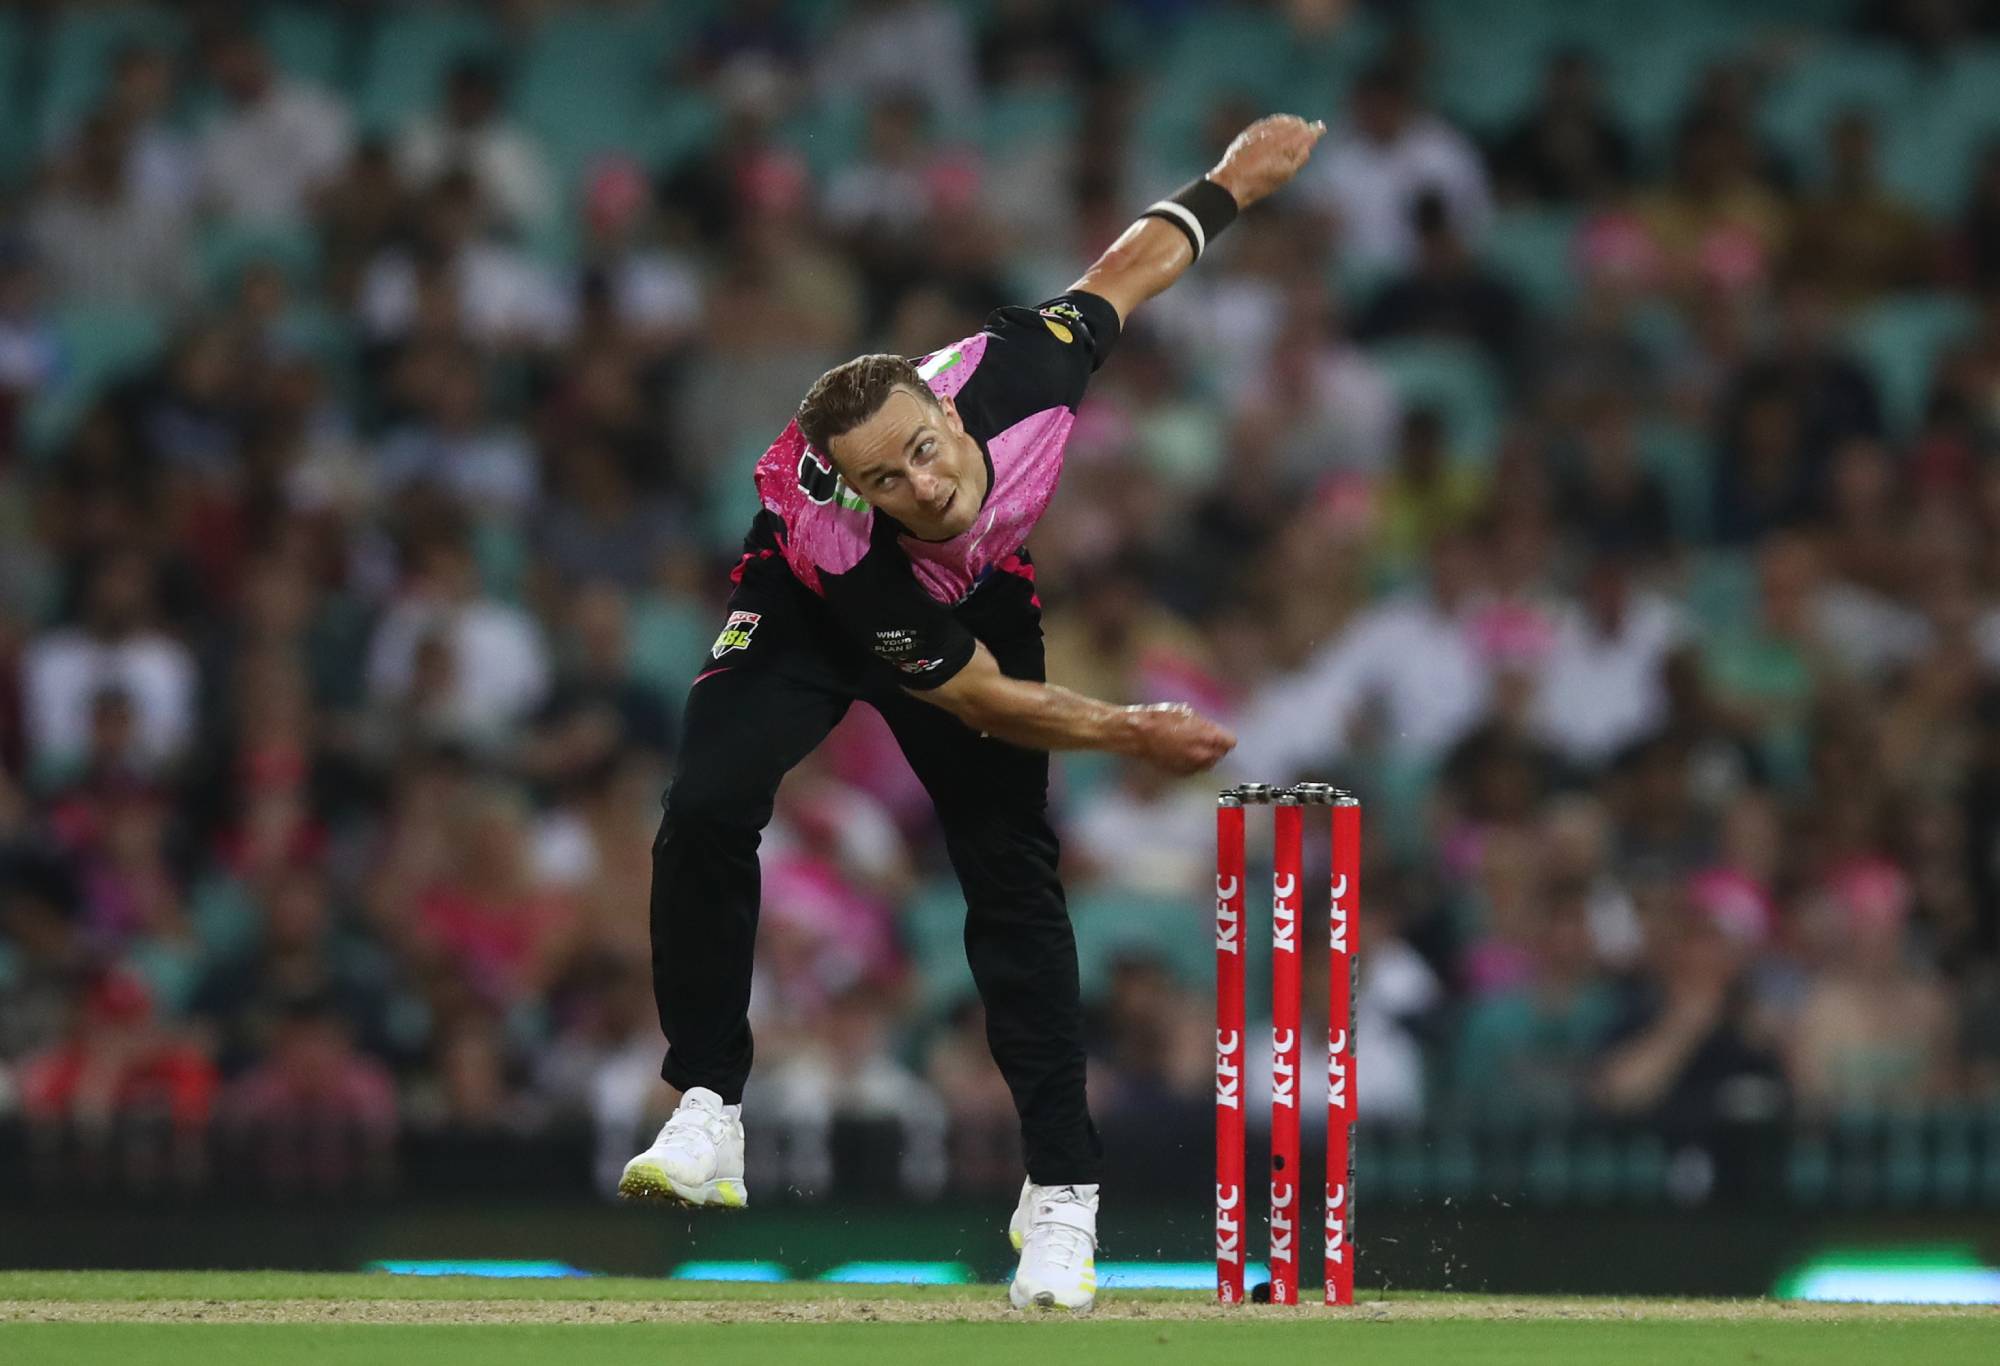 SYDNEY, AUSTRALIA - DECEMBER 08: Tom Curran of the Sixers bowls during the BBL match between Sydney Sixers and Melbourne Renegades at Sydney Cricket Ground on December 08, 2023 in Sydney, Australia. (Photo by Jason McCawley - CA/Cricket Australia via Getty Images)